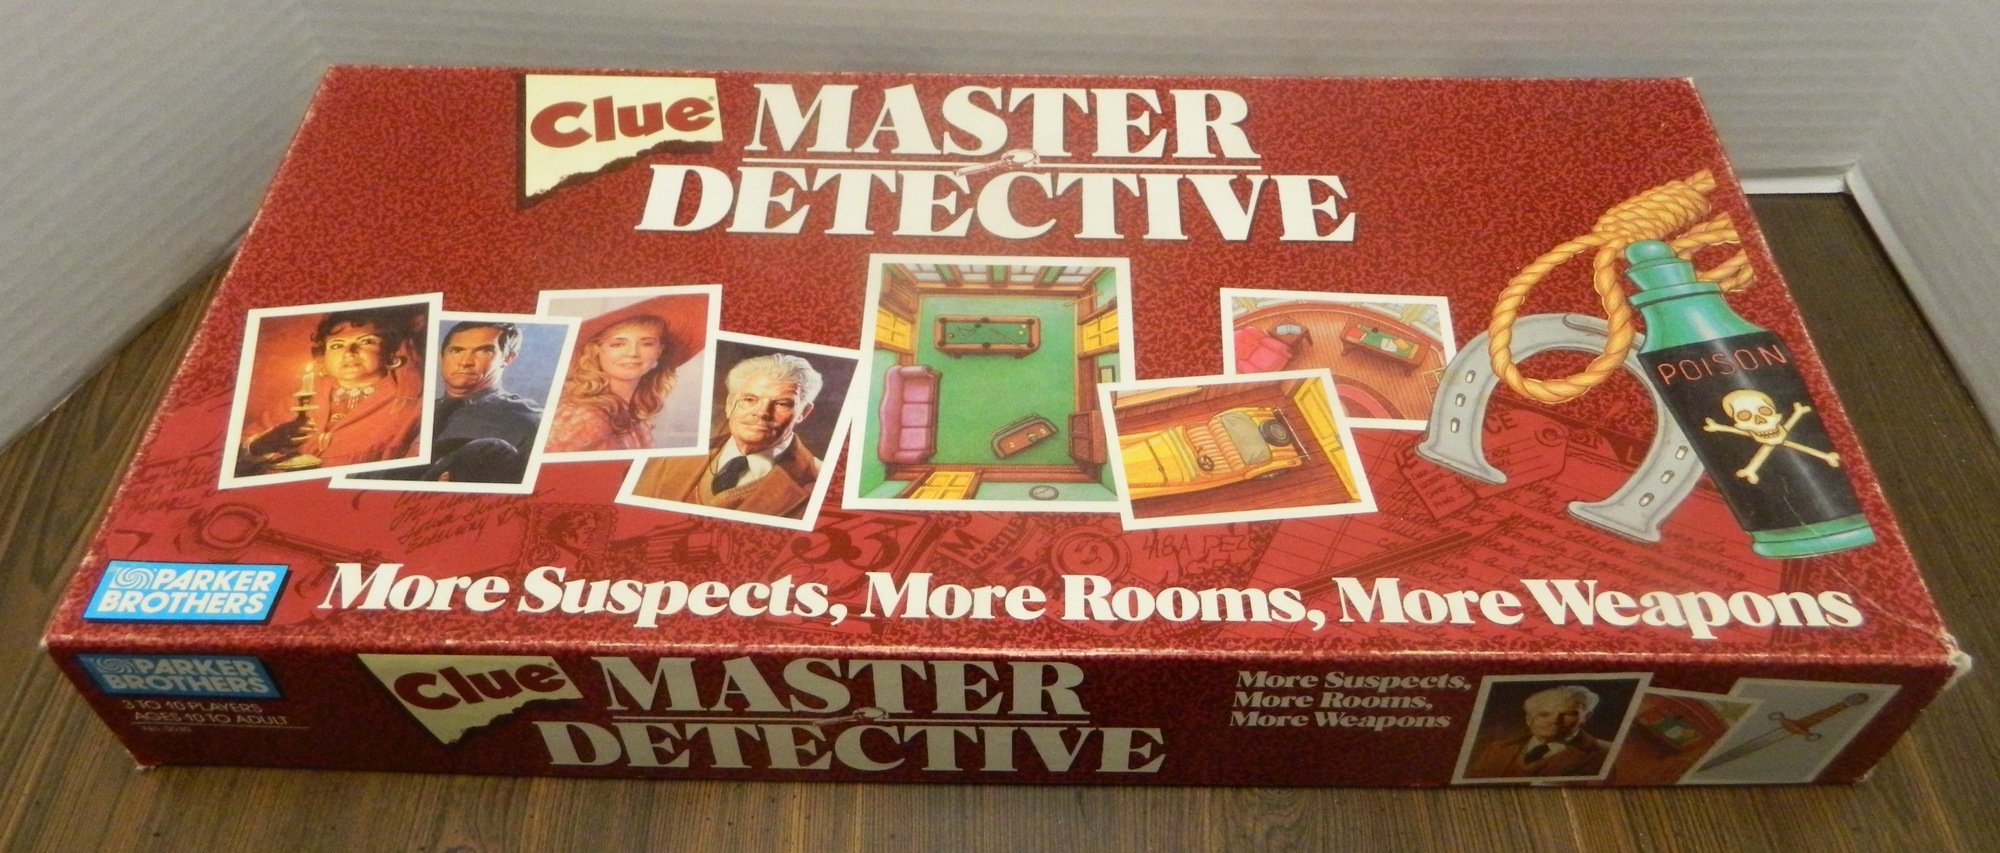 Clue board game instruction manual